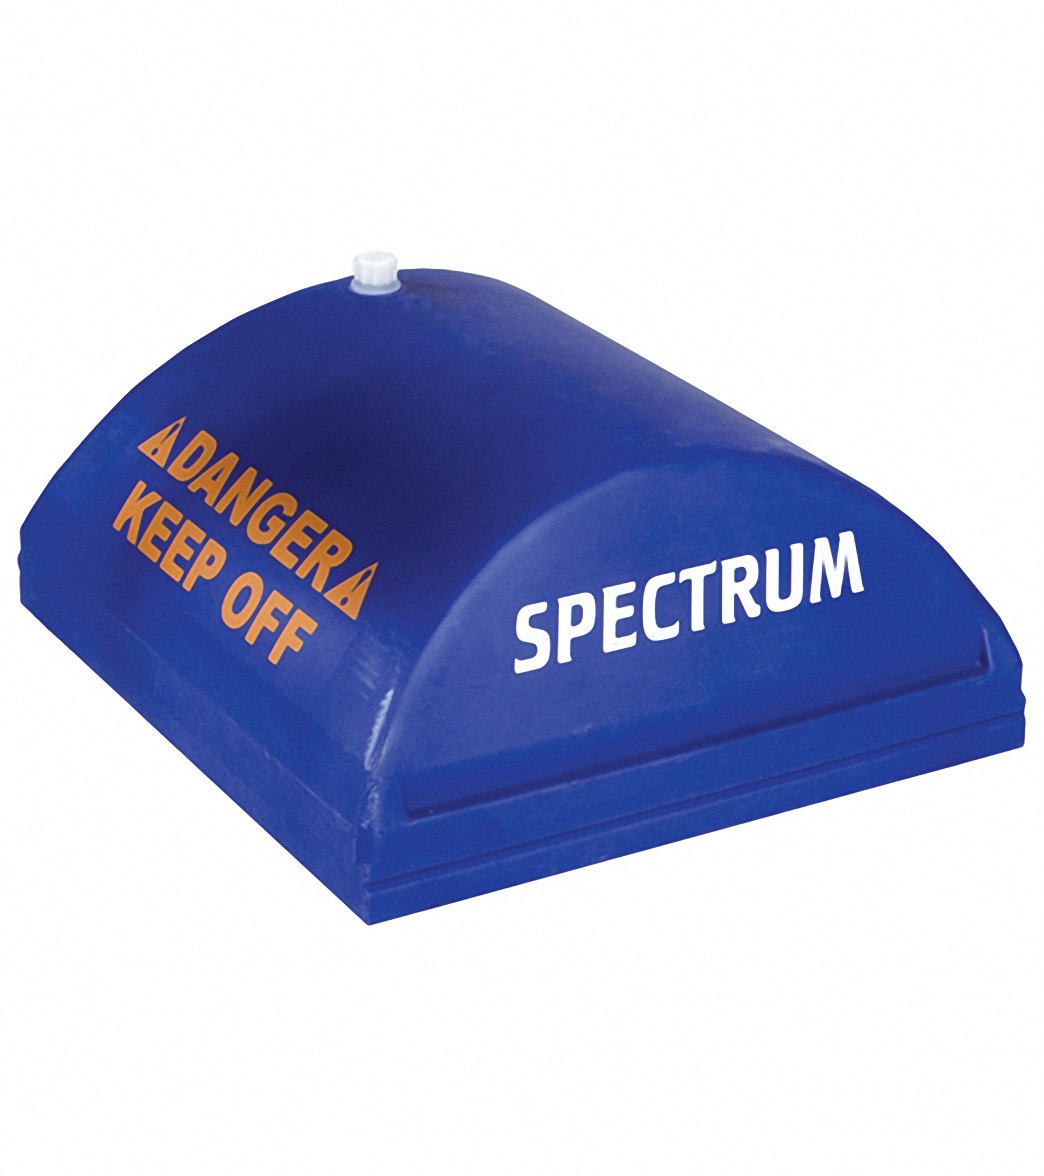 Spectrum Discovery Guard Chair Ballast Assembly